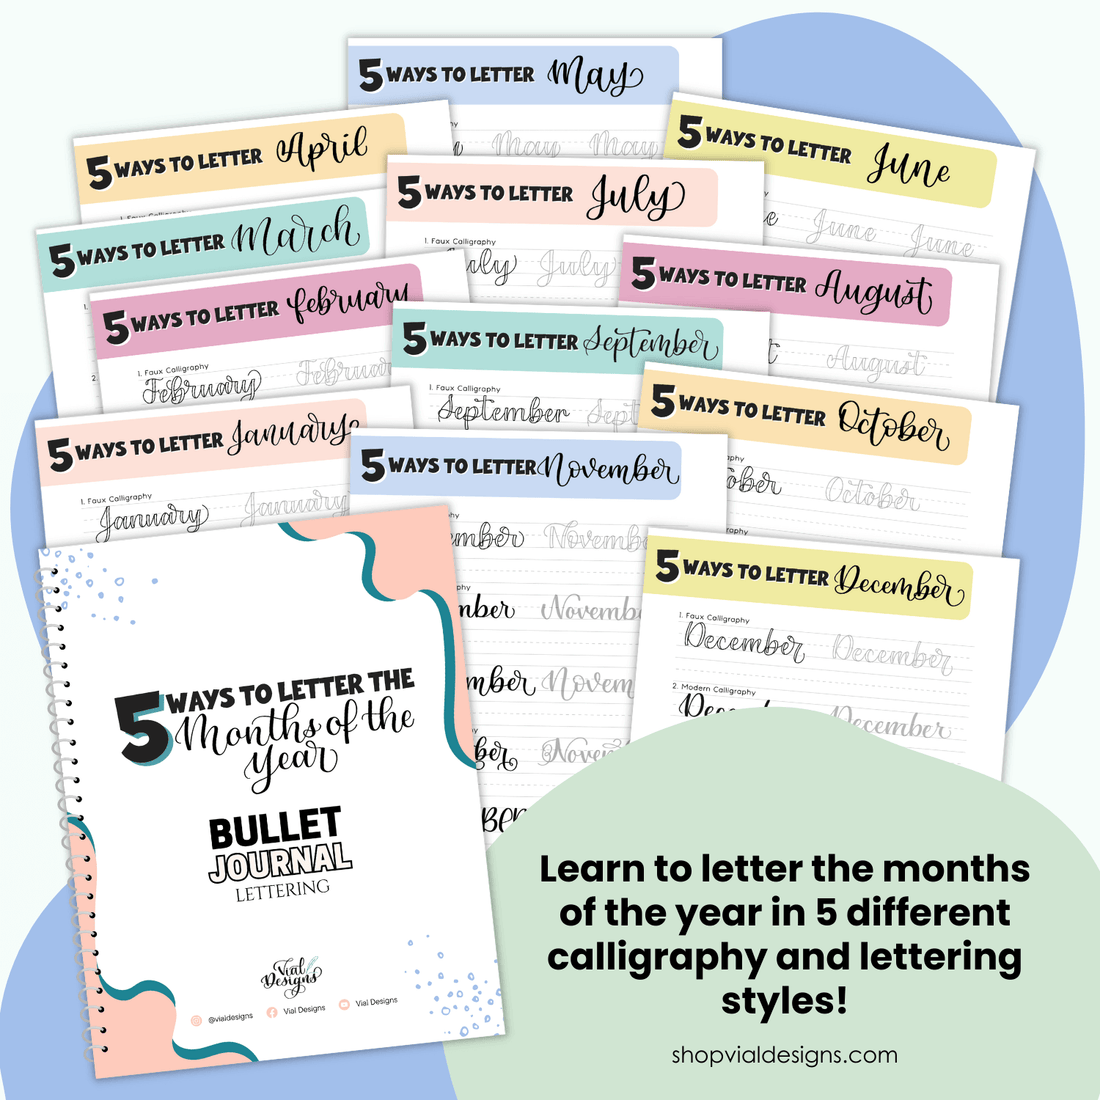 5 ways to letter the months of the year - bullet journal lettering workbook displayed